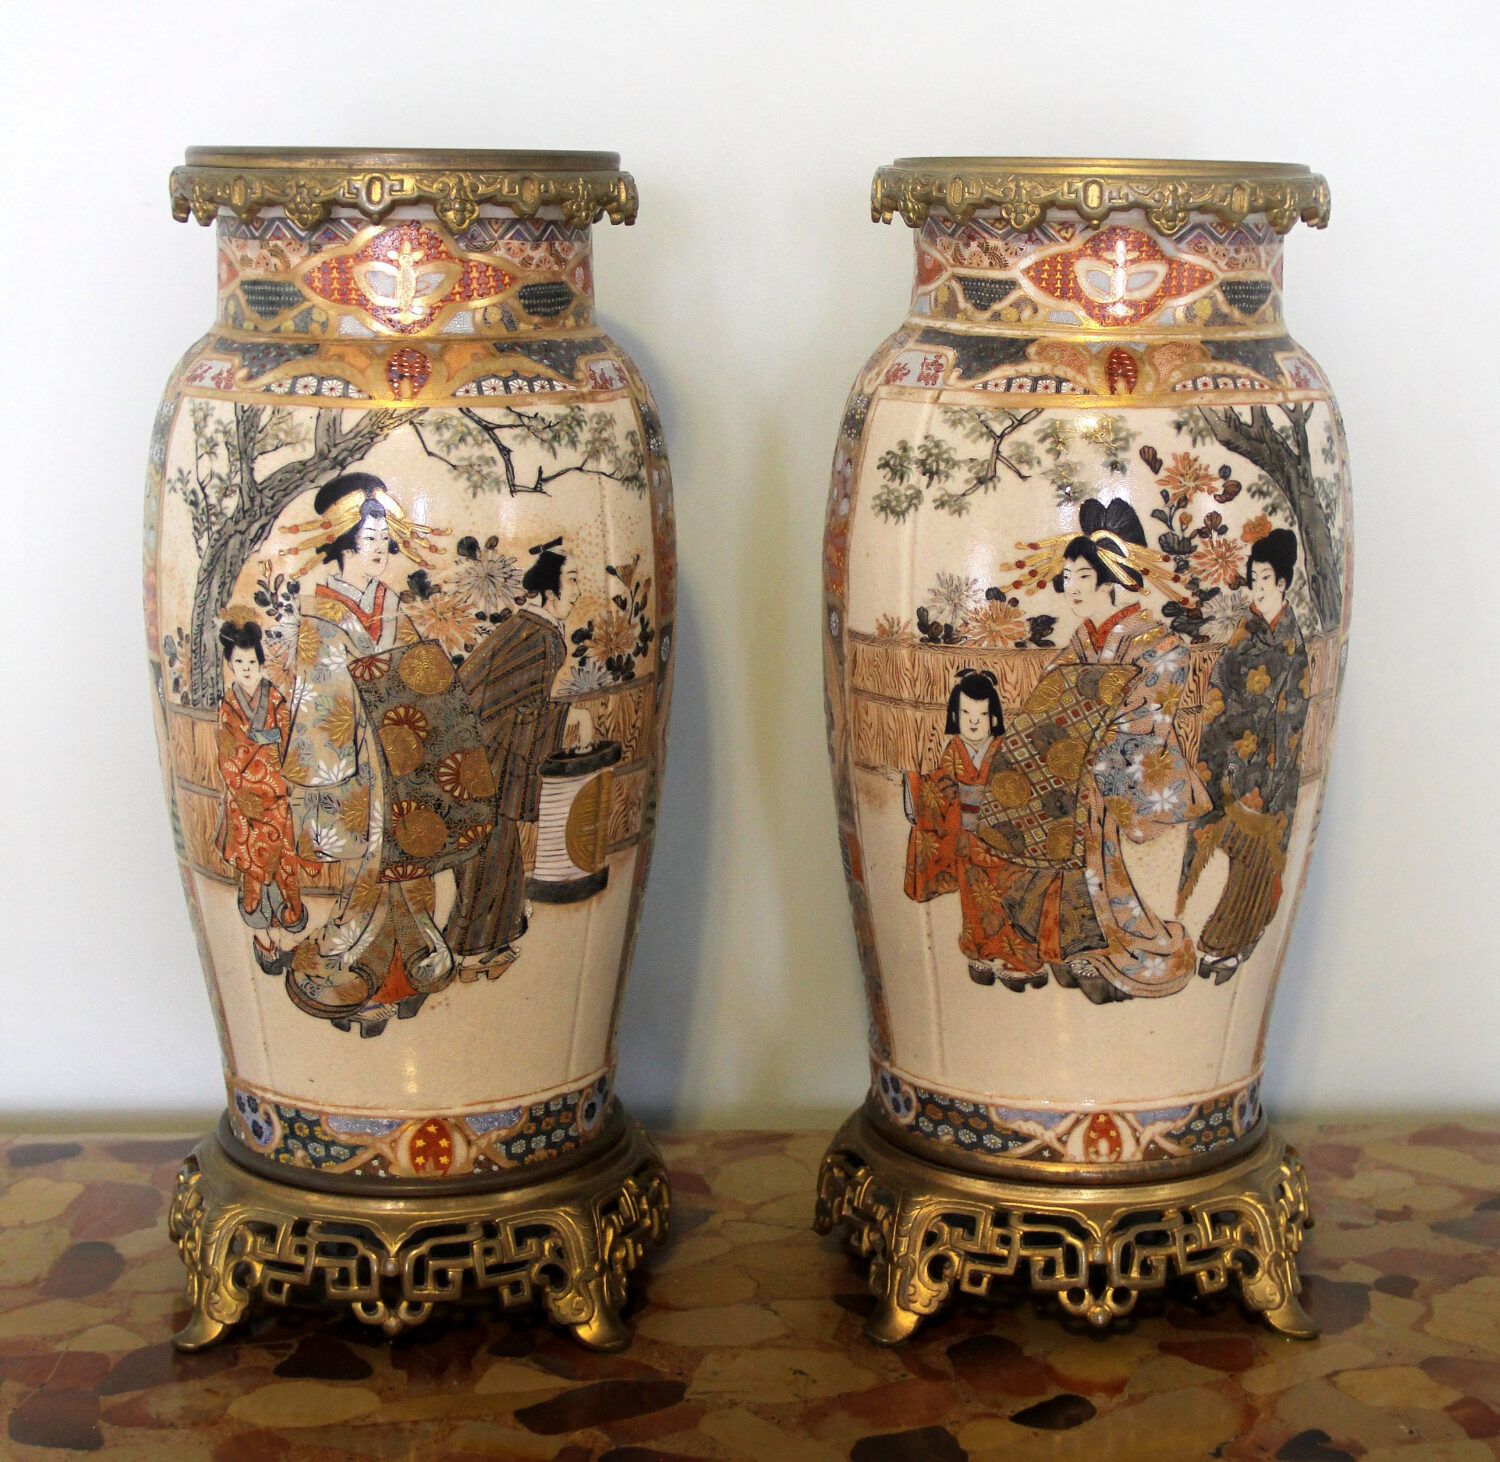 The Exquisite Beauty of 19th Century Satsuma Vases: A Glimpse into Japanese Artistry